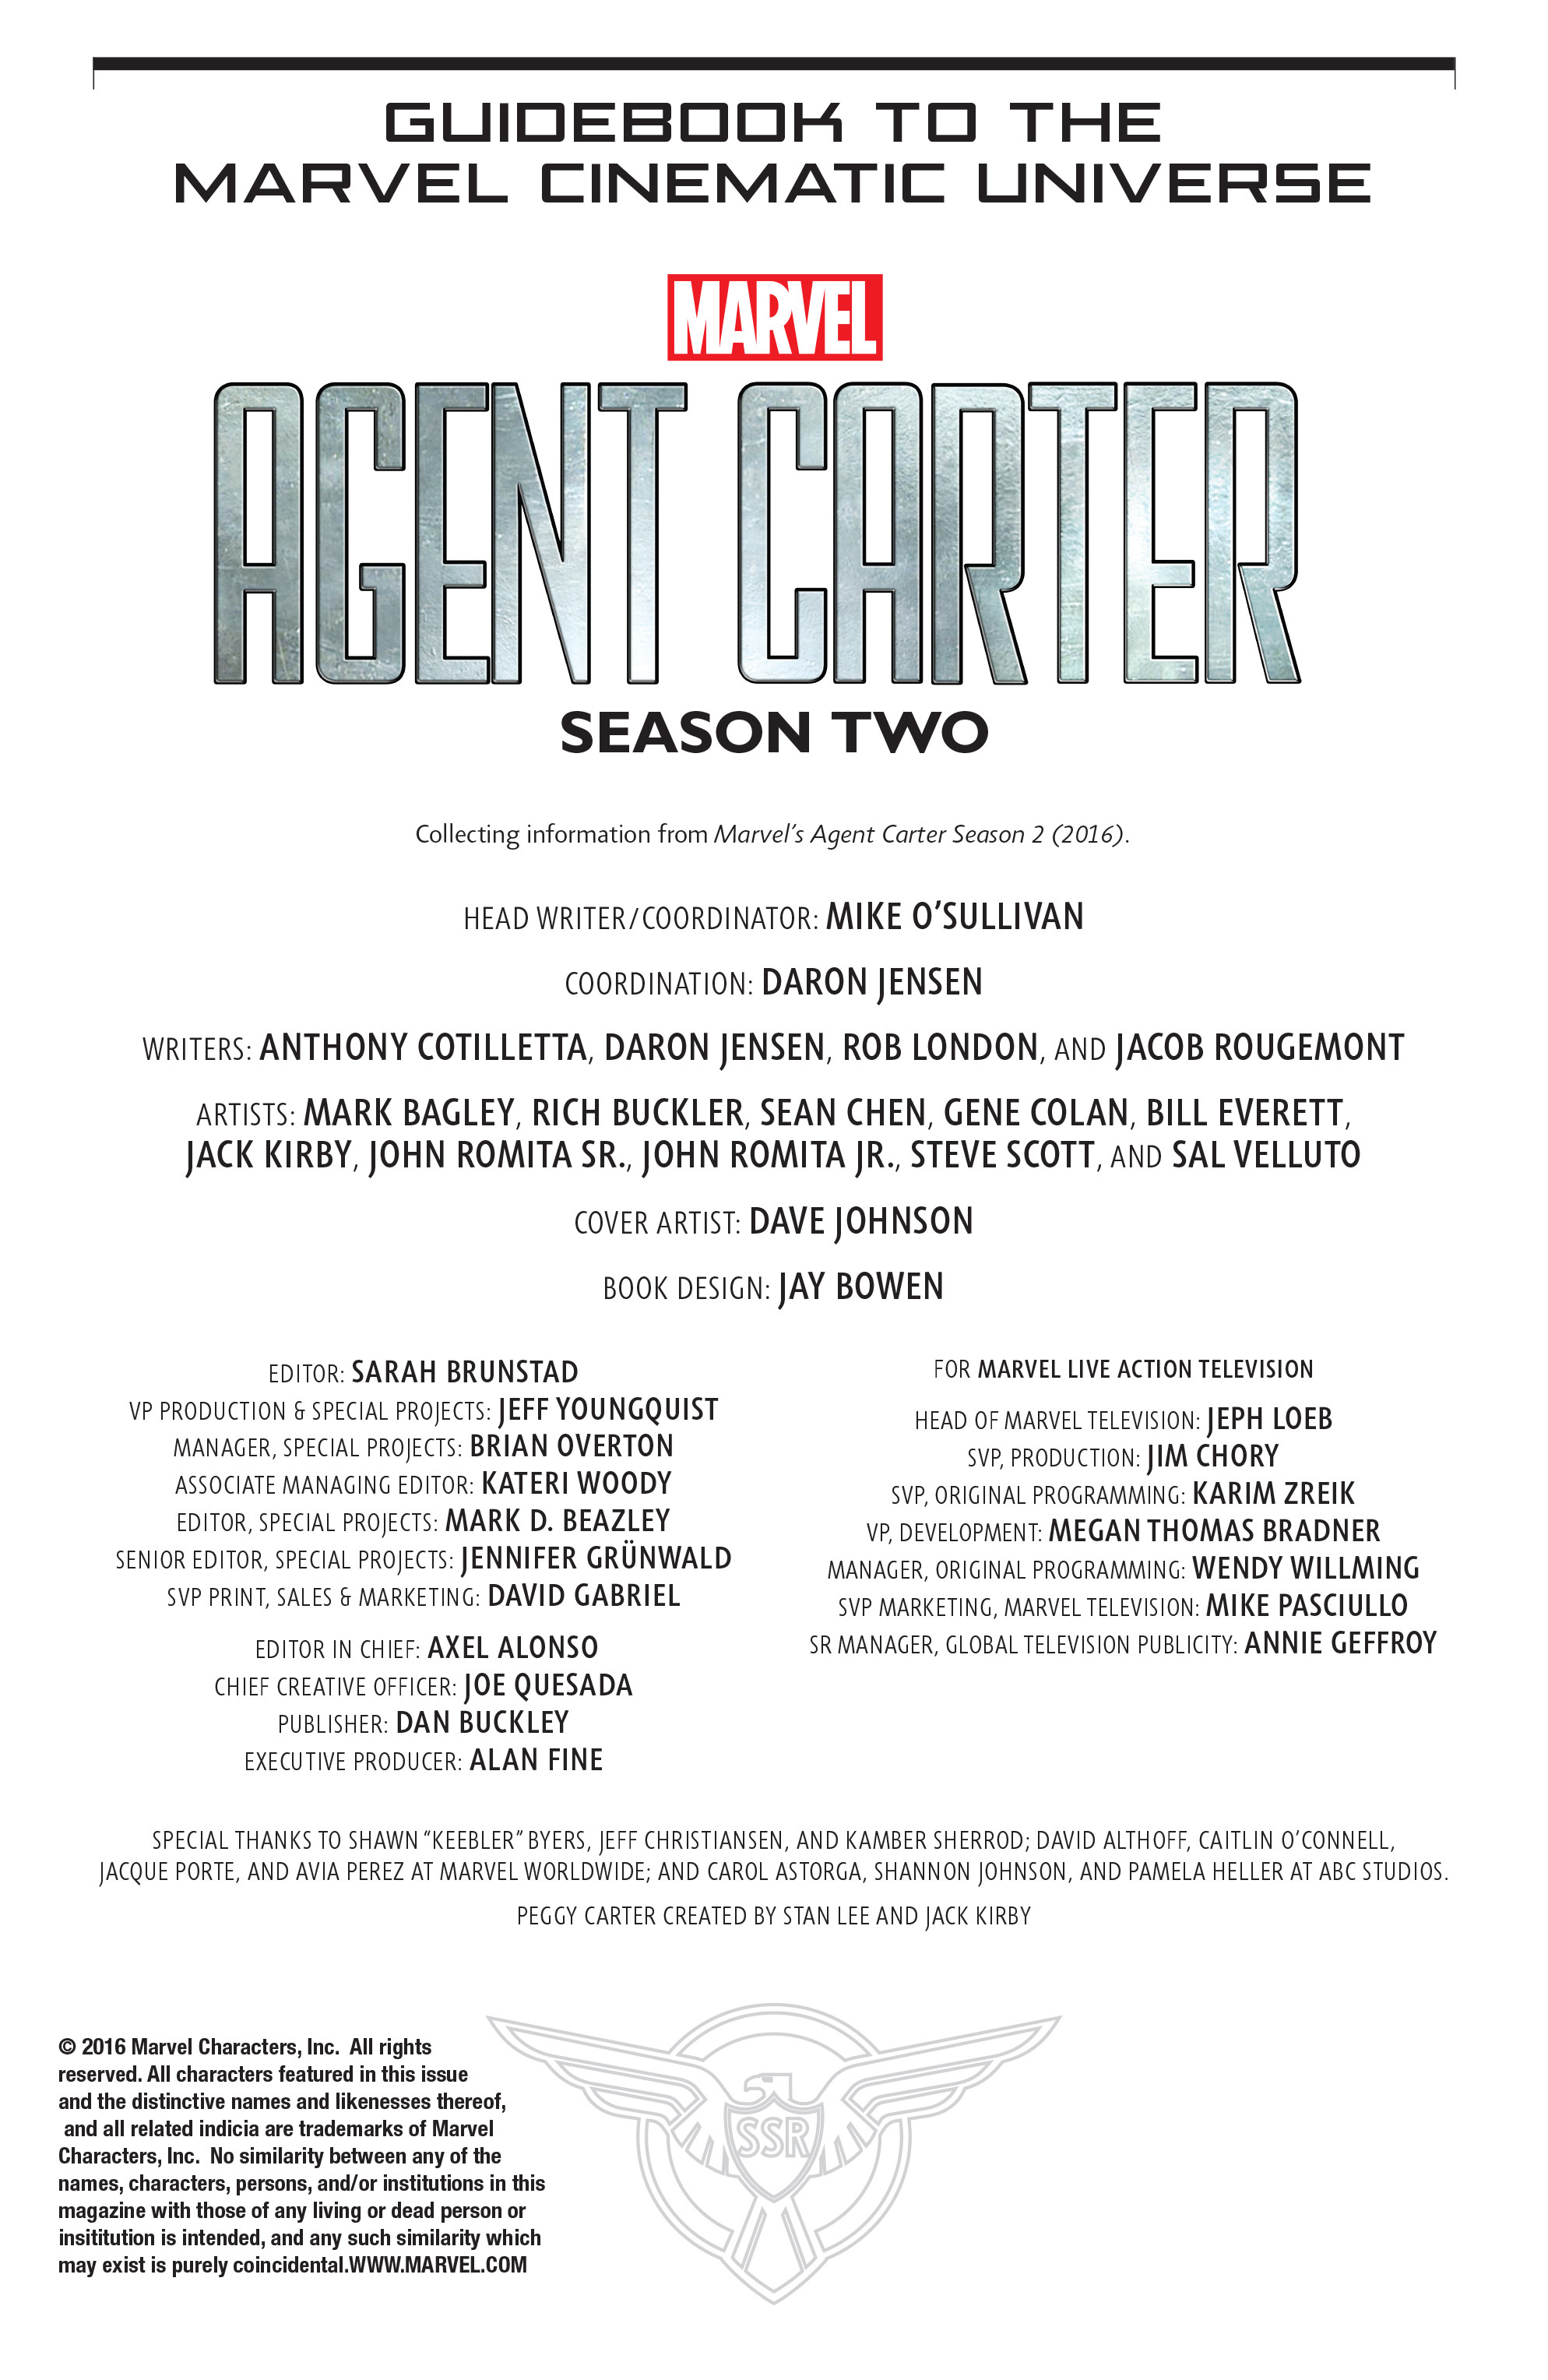 Read online Guidebook to the Marvel Cinematic Universe - Marvel's Agent Carter Season Two comic -  Issue # Full - 2